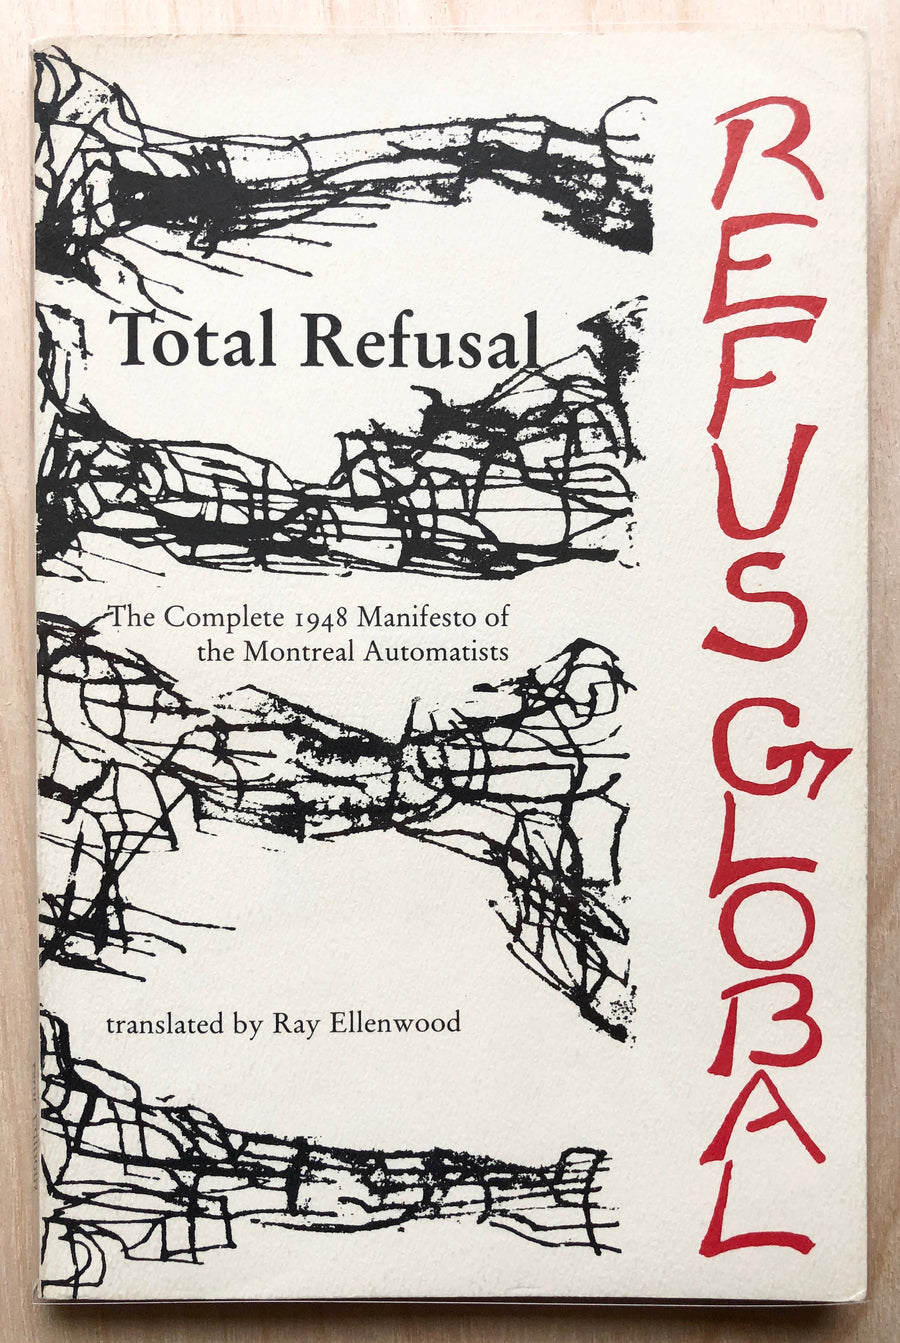 TOTAL REFUSAL: THE COMPLETE 1948 MANIFESTO OF THE MONTREAL AUTOMATISTS translated by Ray Ellenwood